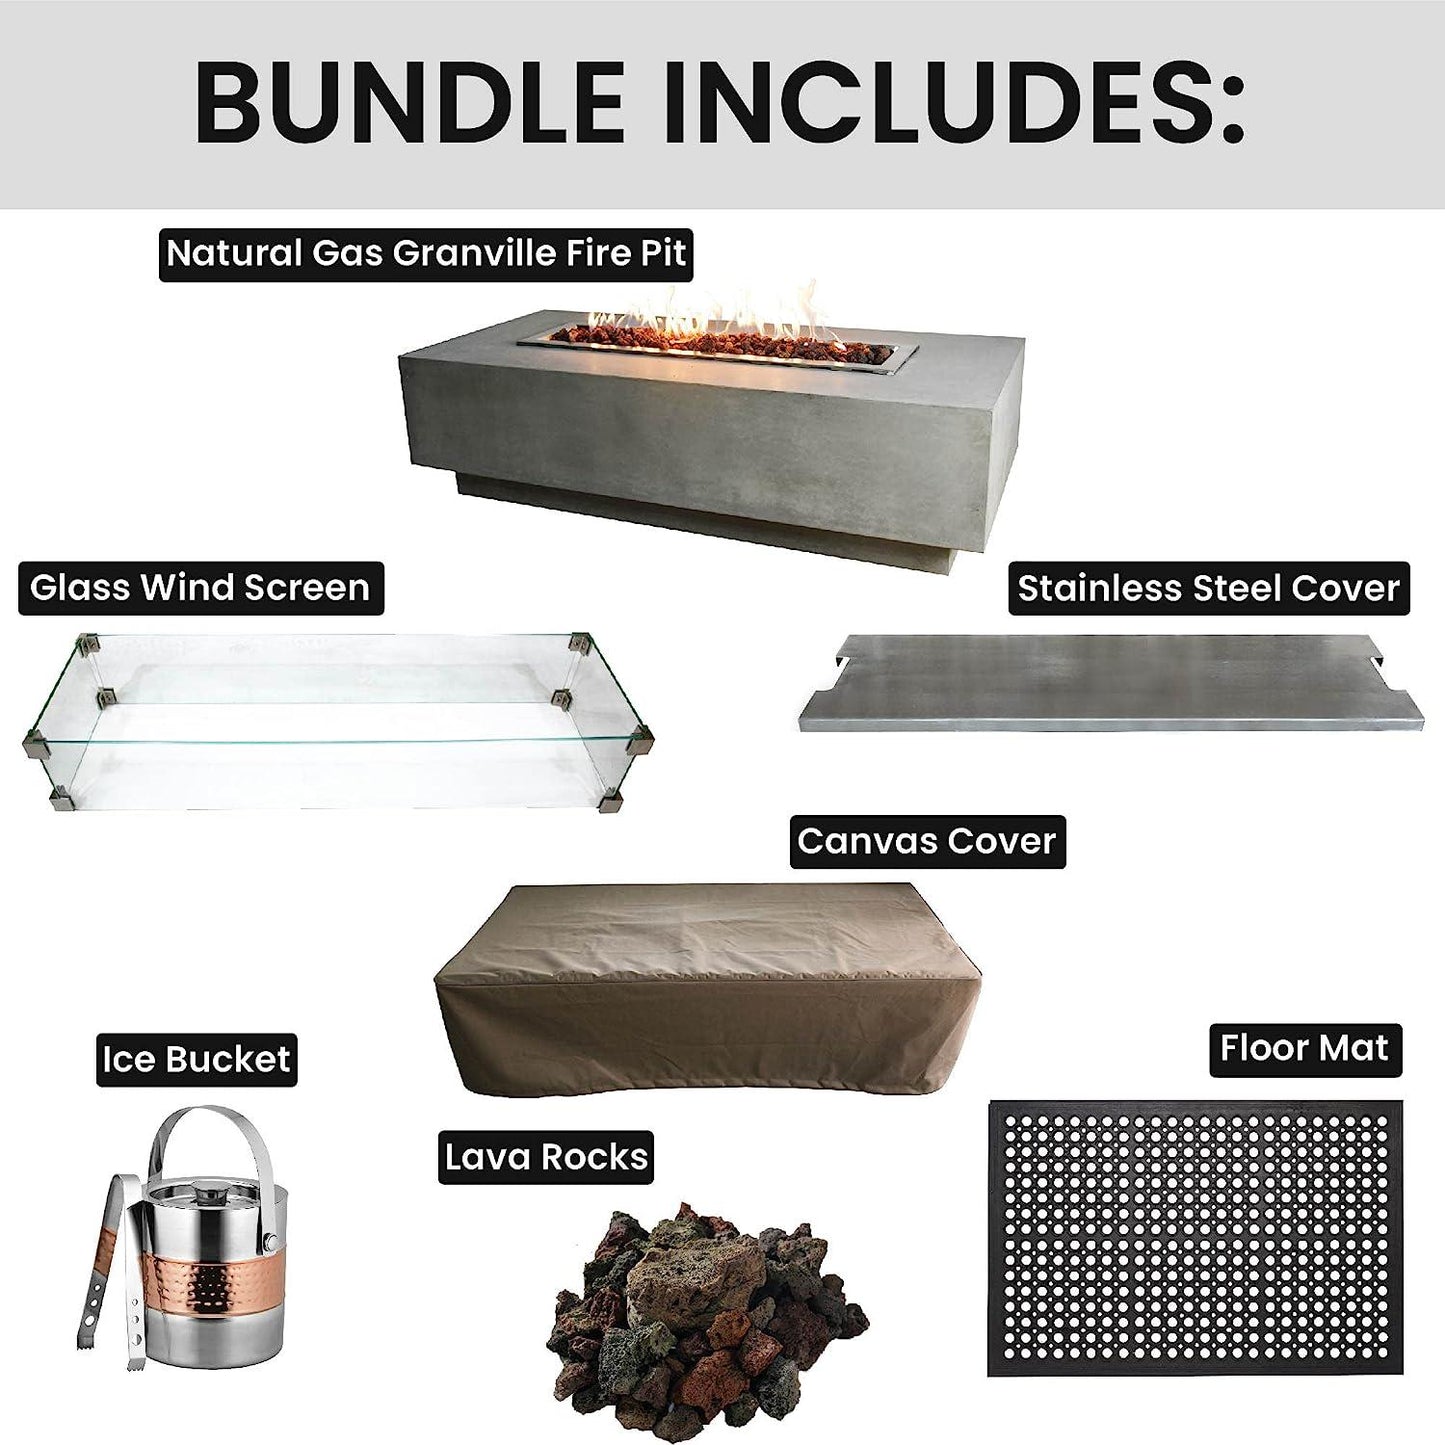 Granville Fire Pit Bundle Outdoor Firepit Set Includes 60 Natural Gas Concrete Firepit Table, Glass Windscreen, Stainless Steel Cover, Canvas Cover, Floor Mat, Ice Bucket